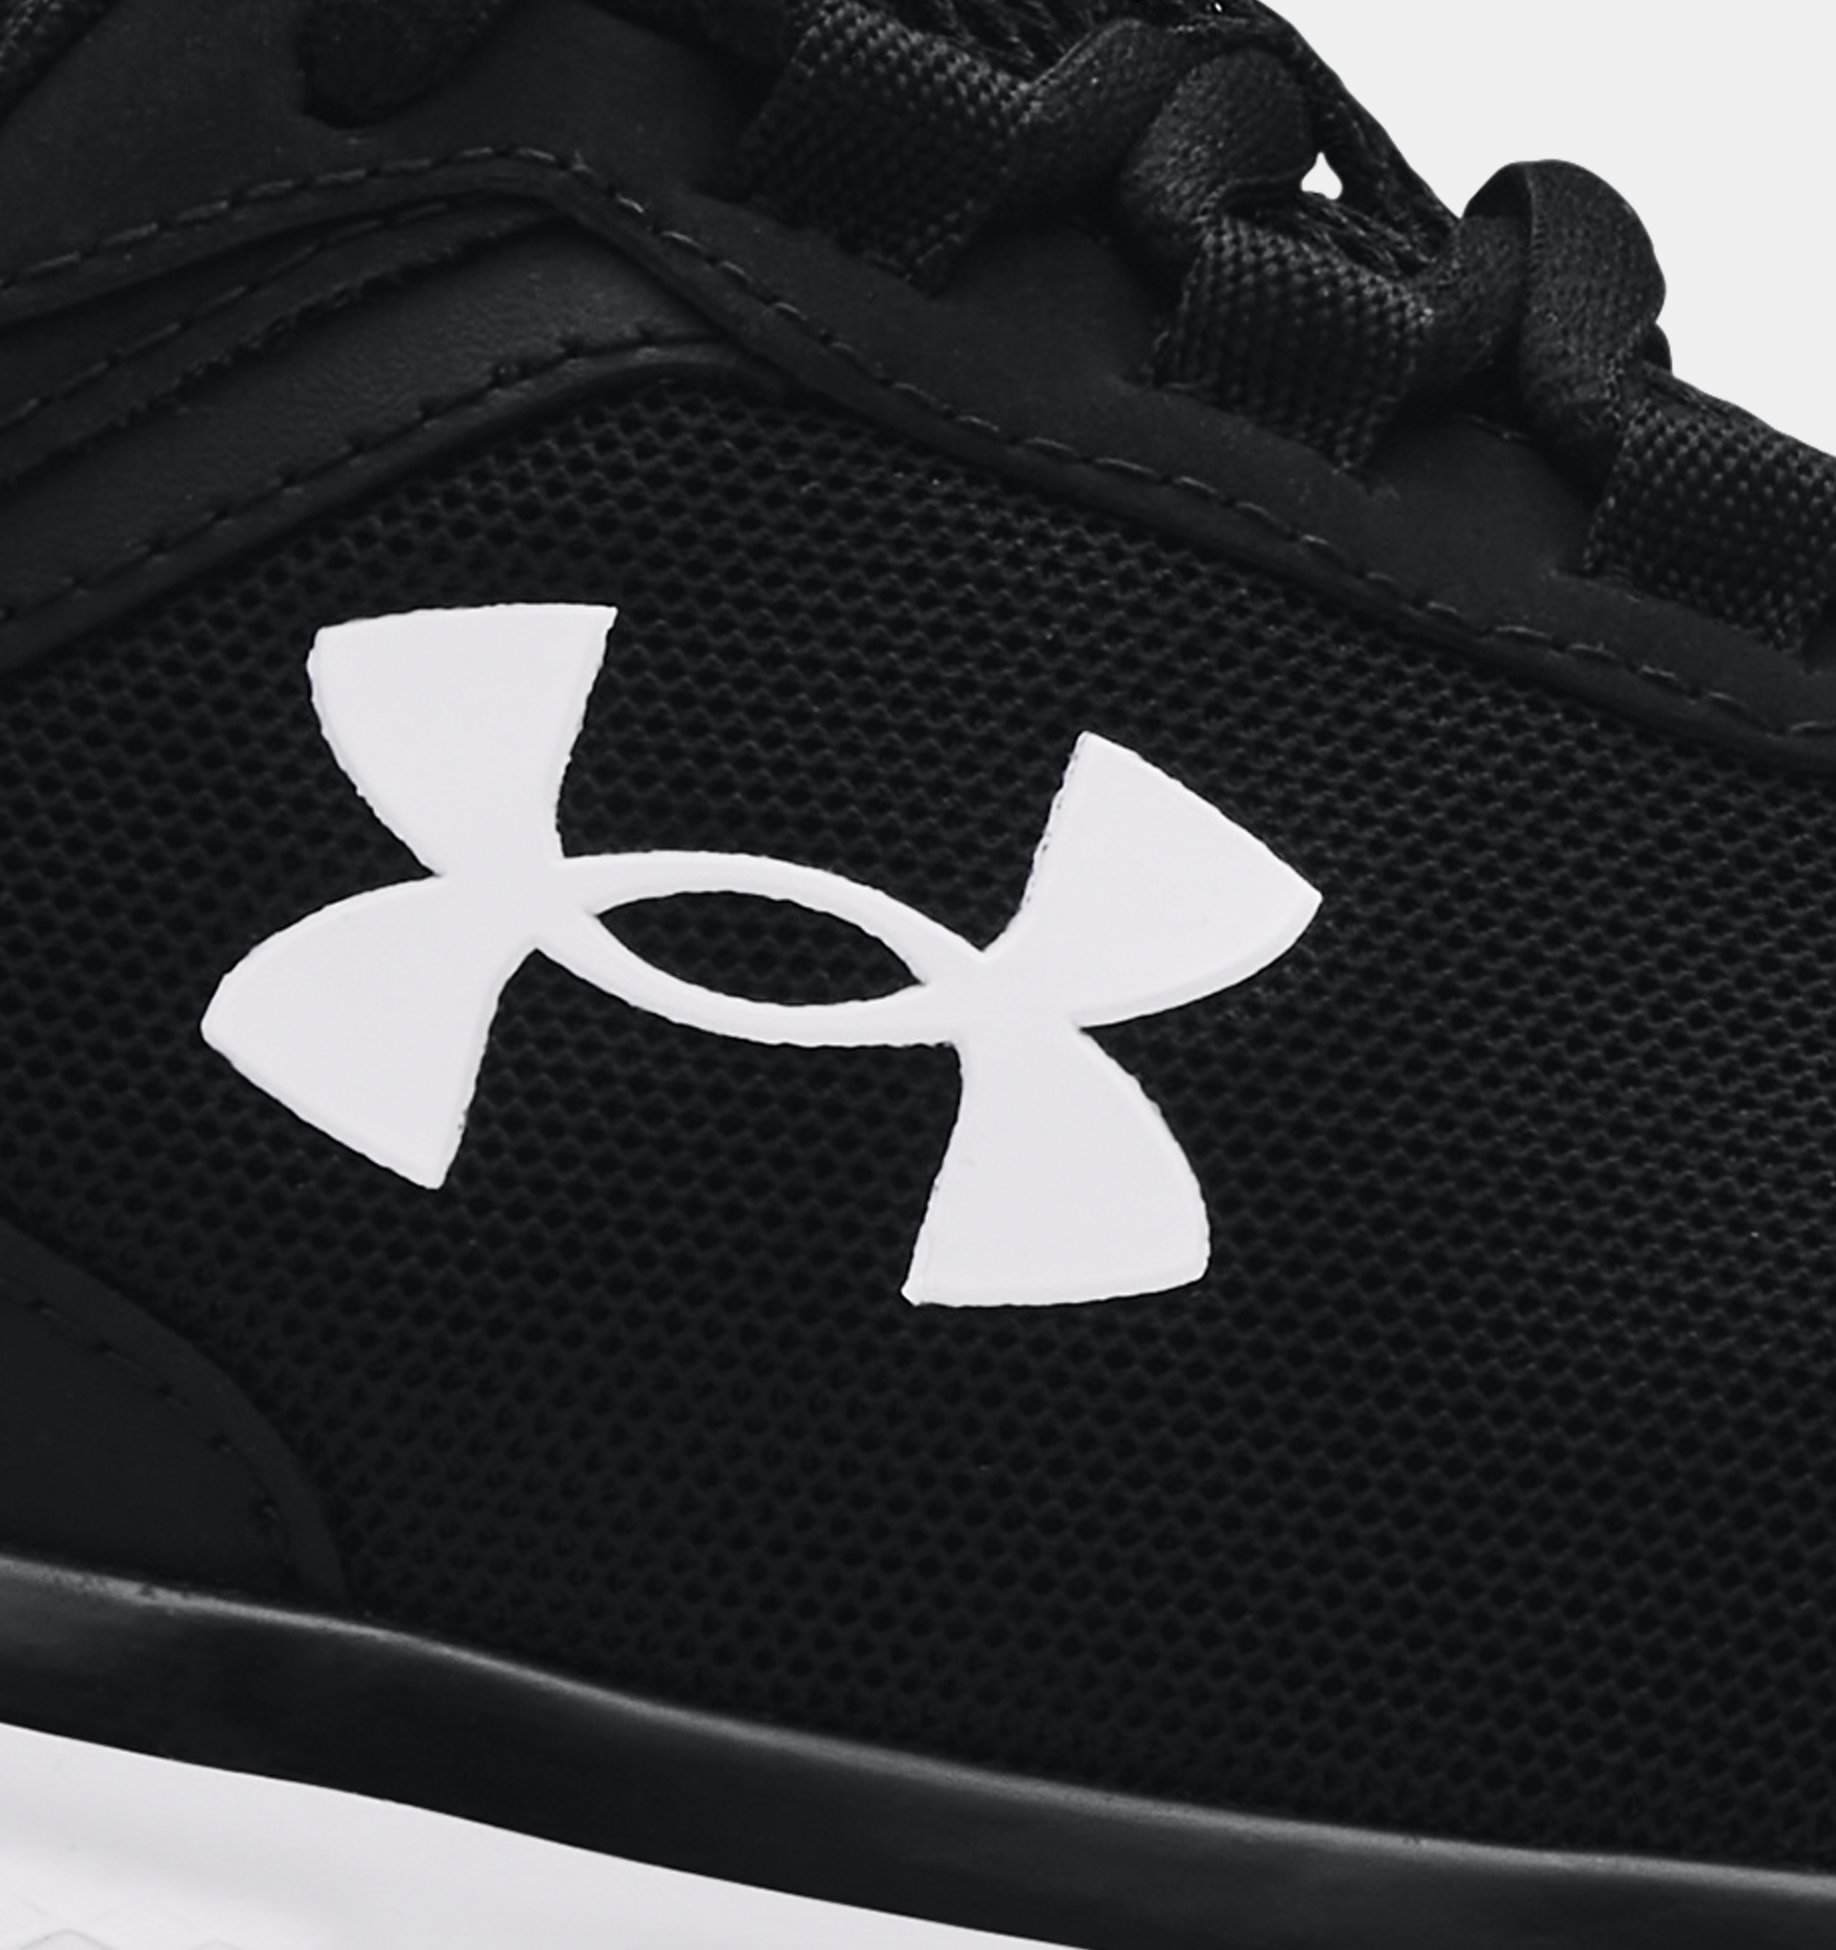 Does Under Armour Shoes Carry Wide?